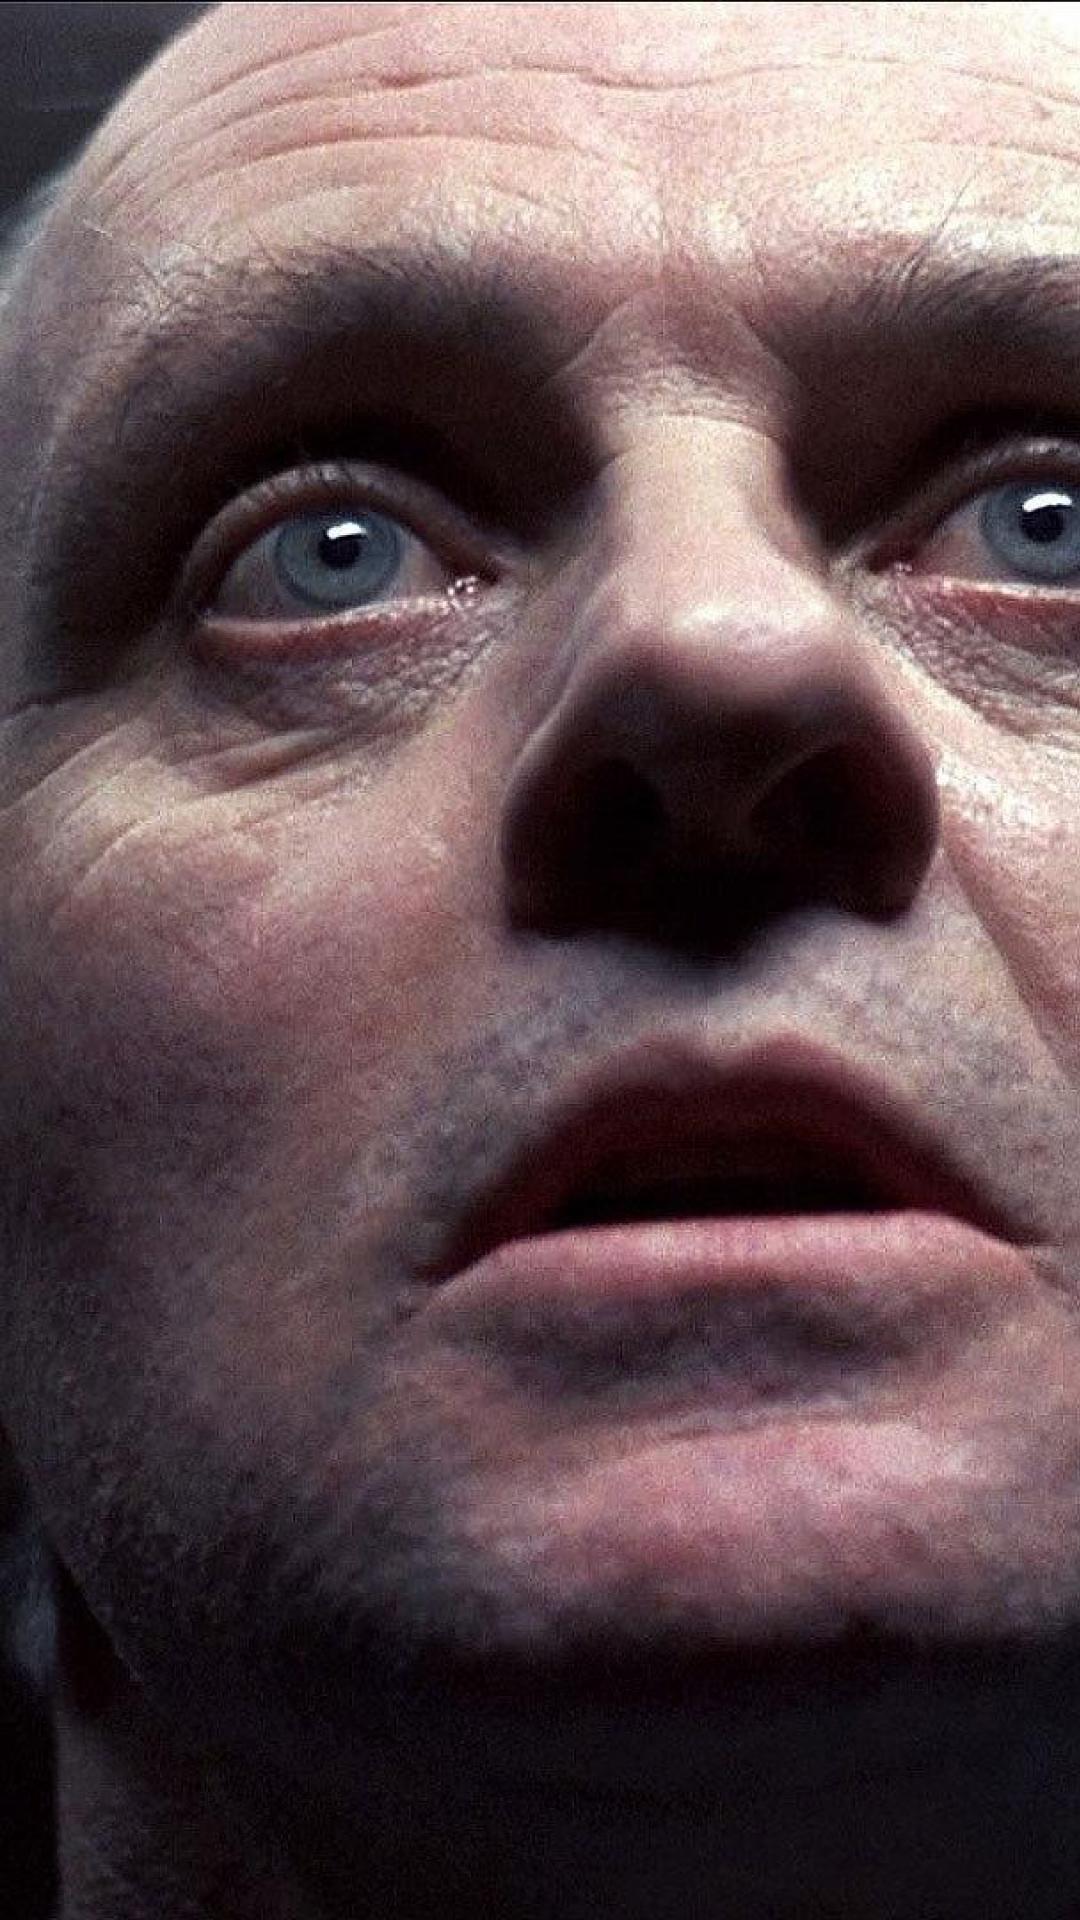 Silence of the lambs wallpaper Gallery